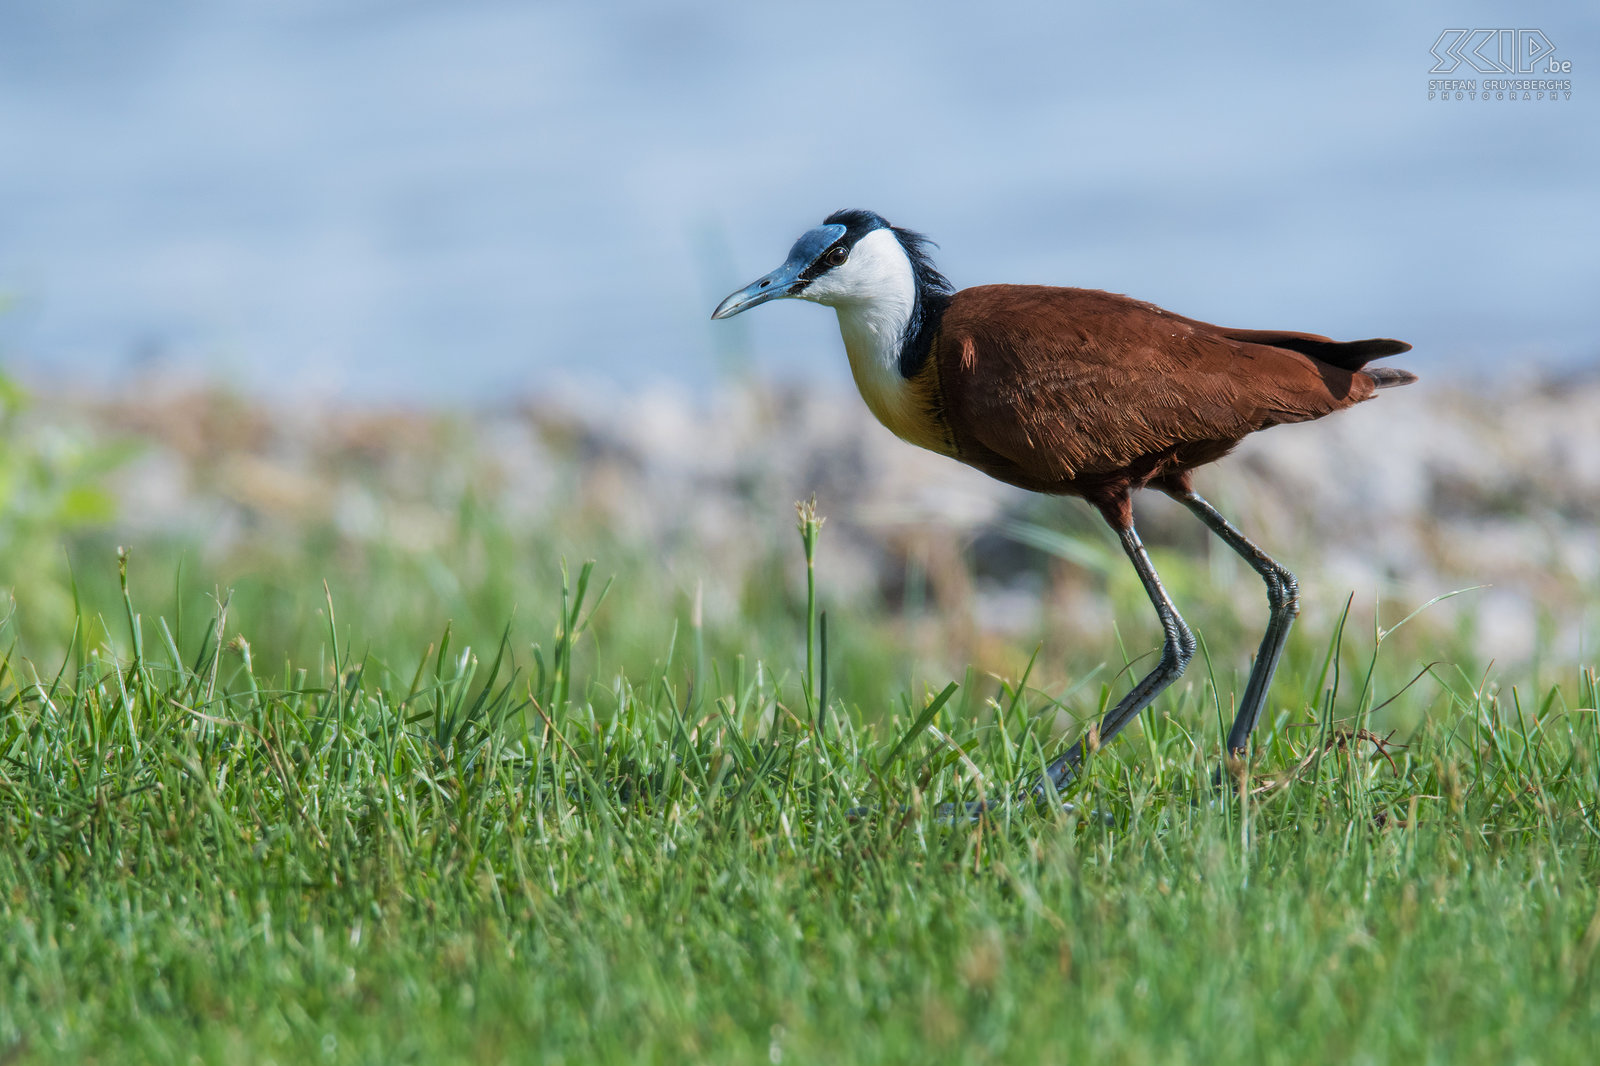 Lake Awassa - African jacana African jacana (Actophilornis africanus) at Lake Awassa. Lake Awassa is one of the 6 lakes in the Rift Valley and it is located at an elevation of 1708 meters.  Stefan Cruysberghs